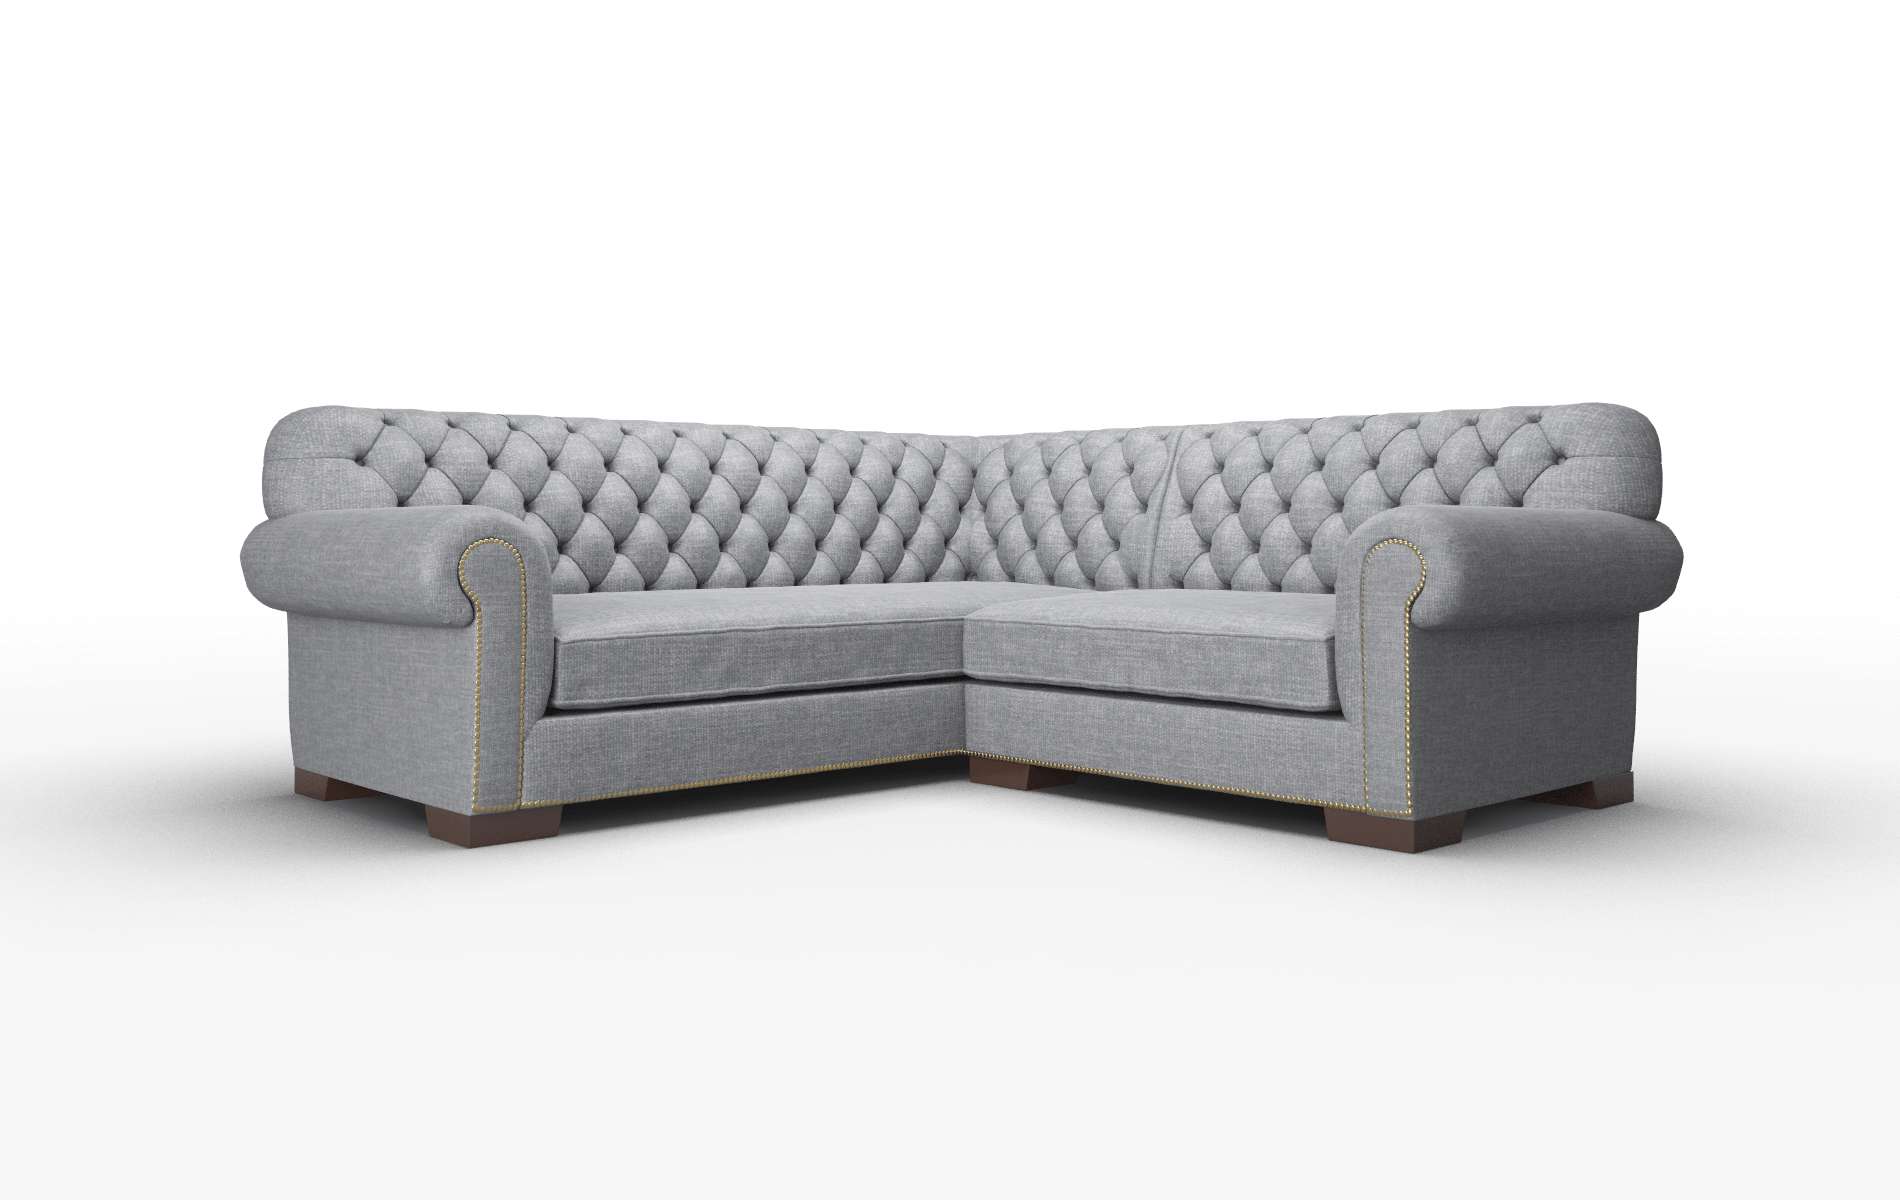 Chester Lana Onyx Sectional espresso legs 1